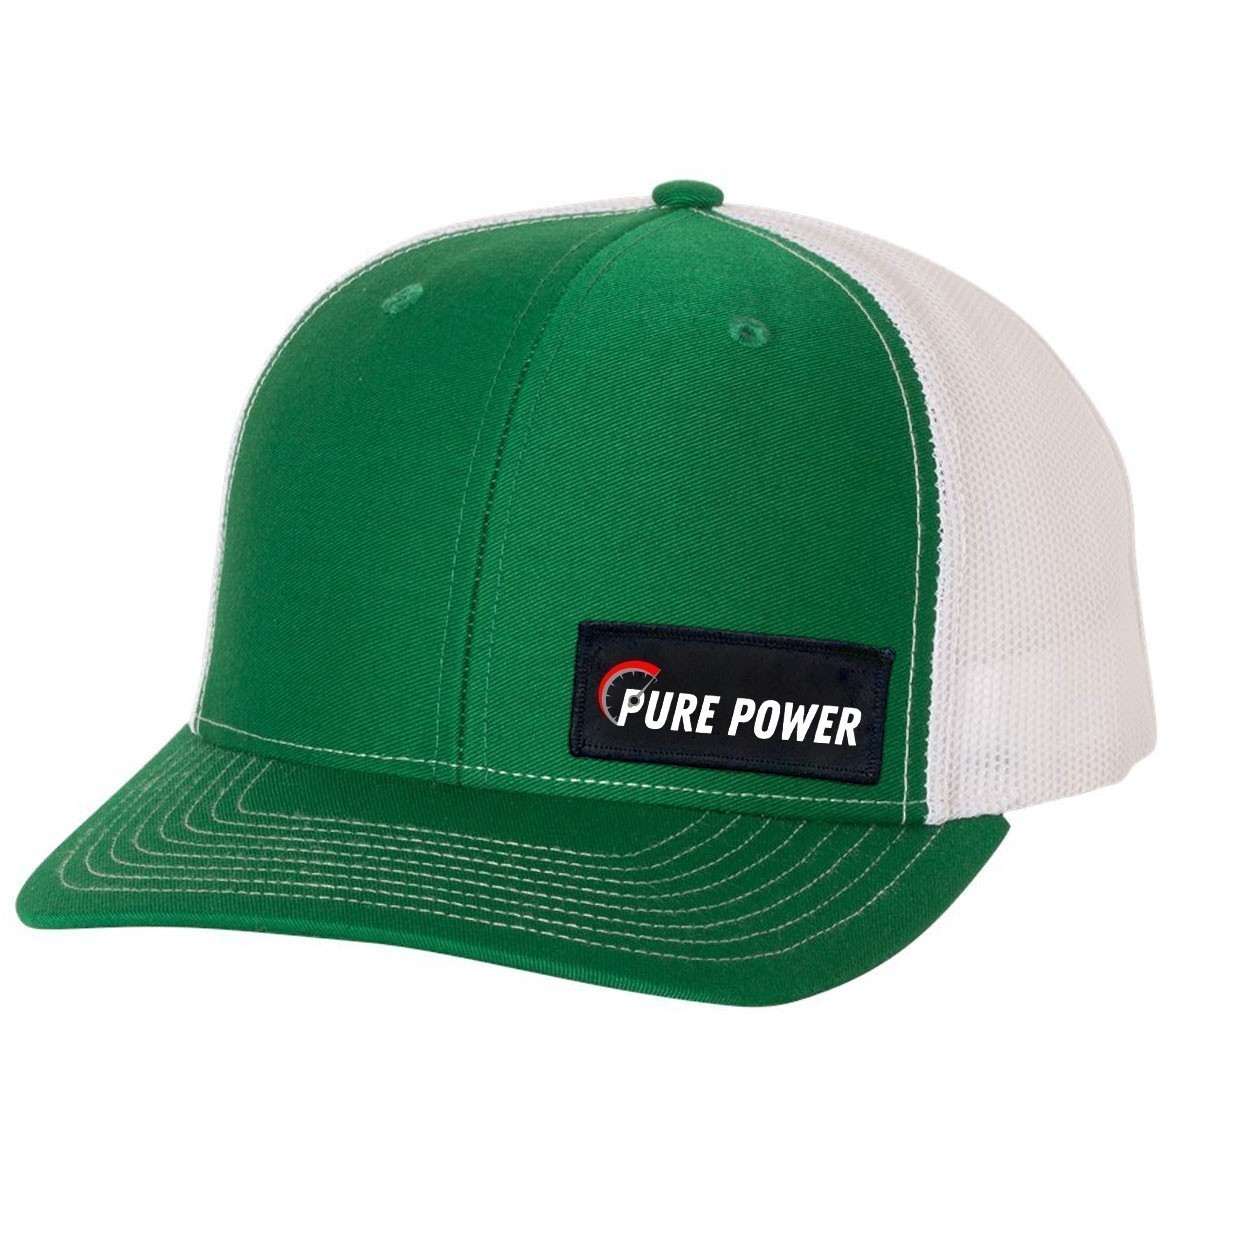 Ride Pure Power Logo Night Out Woven Patch Snapback Trucker Hat Green/White (White Logo)